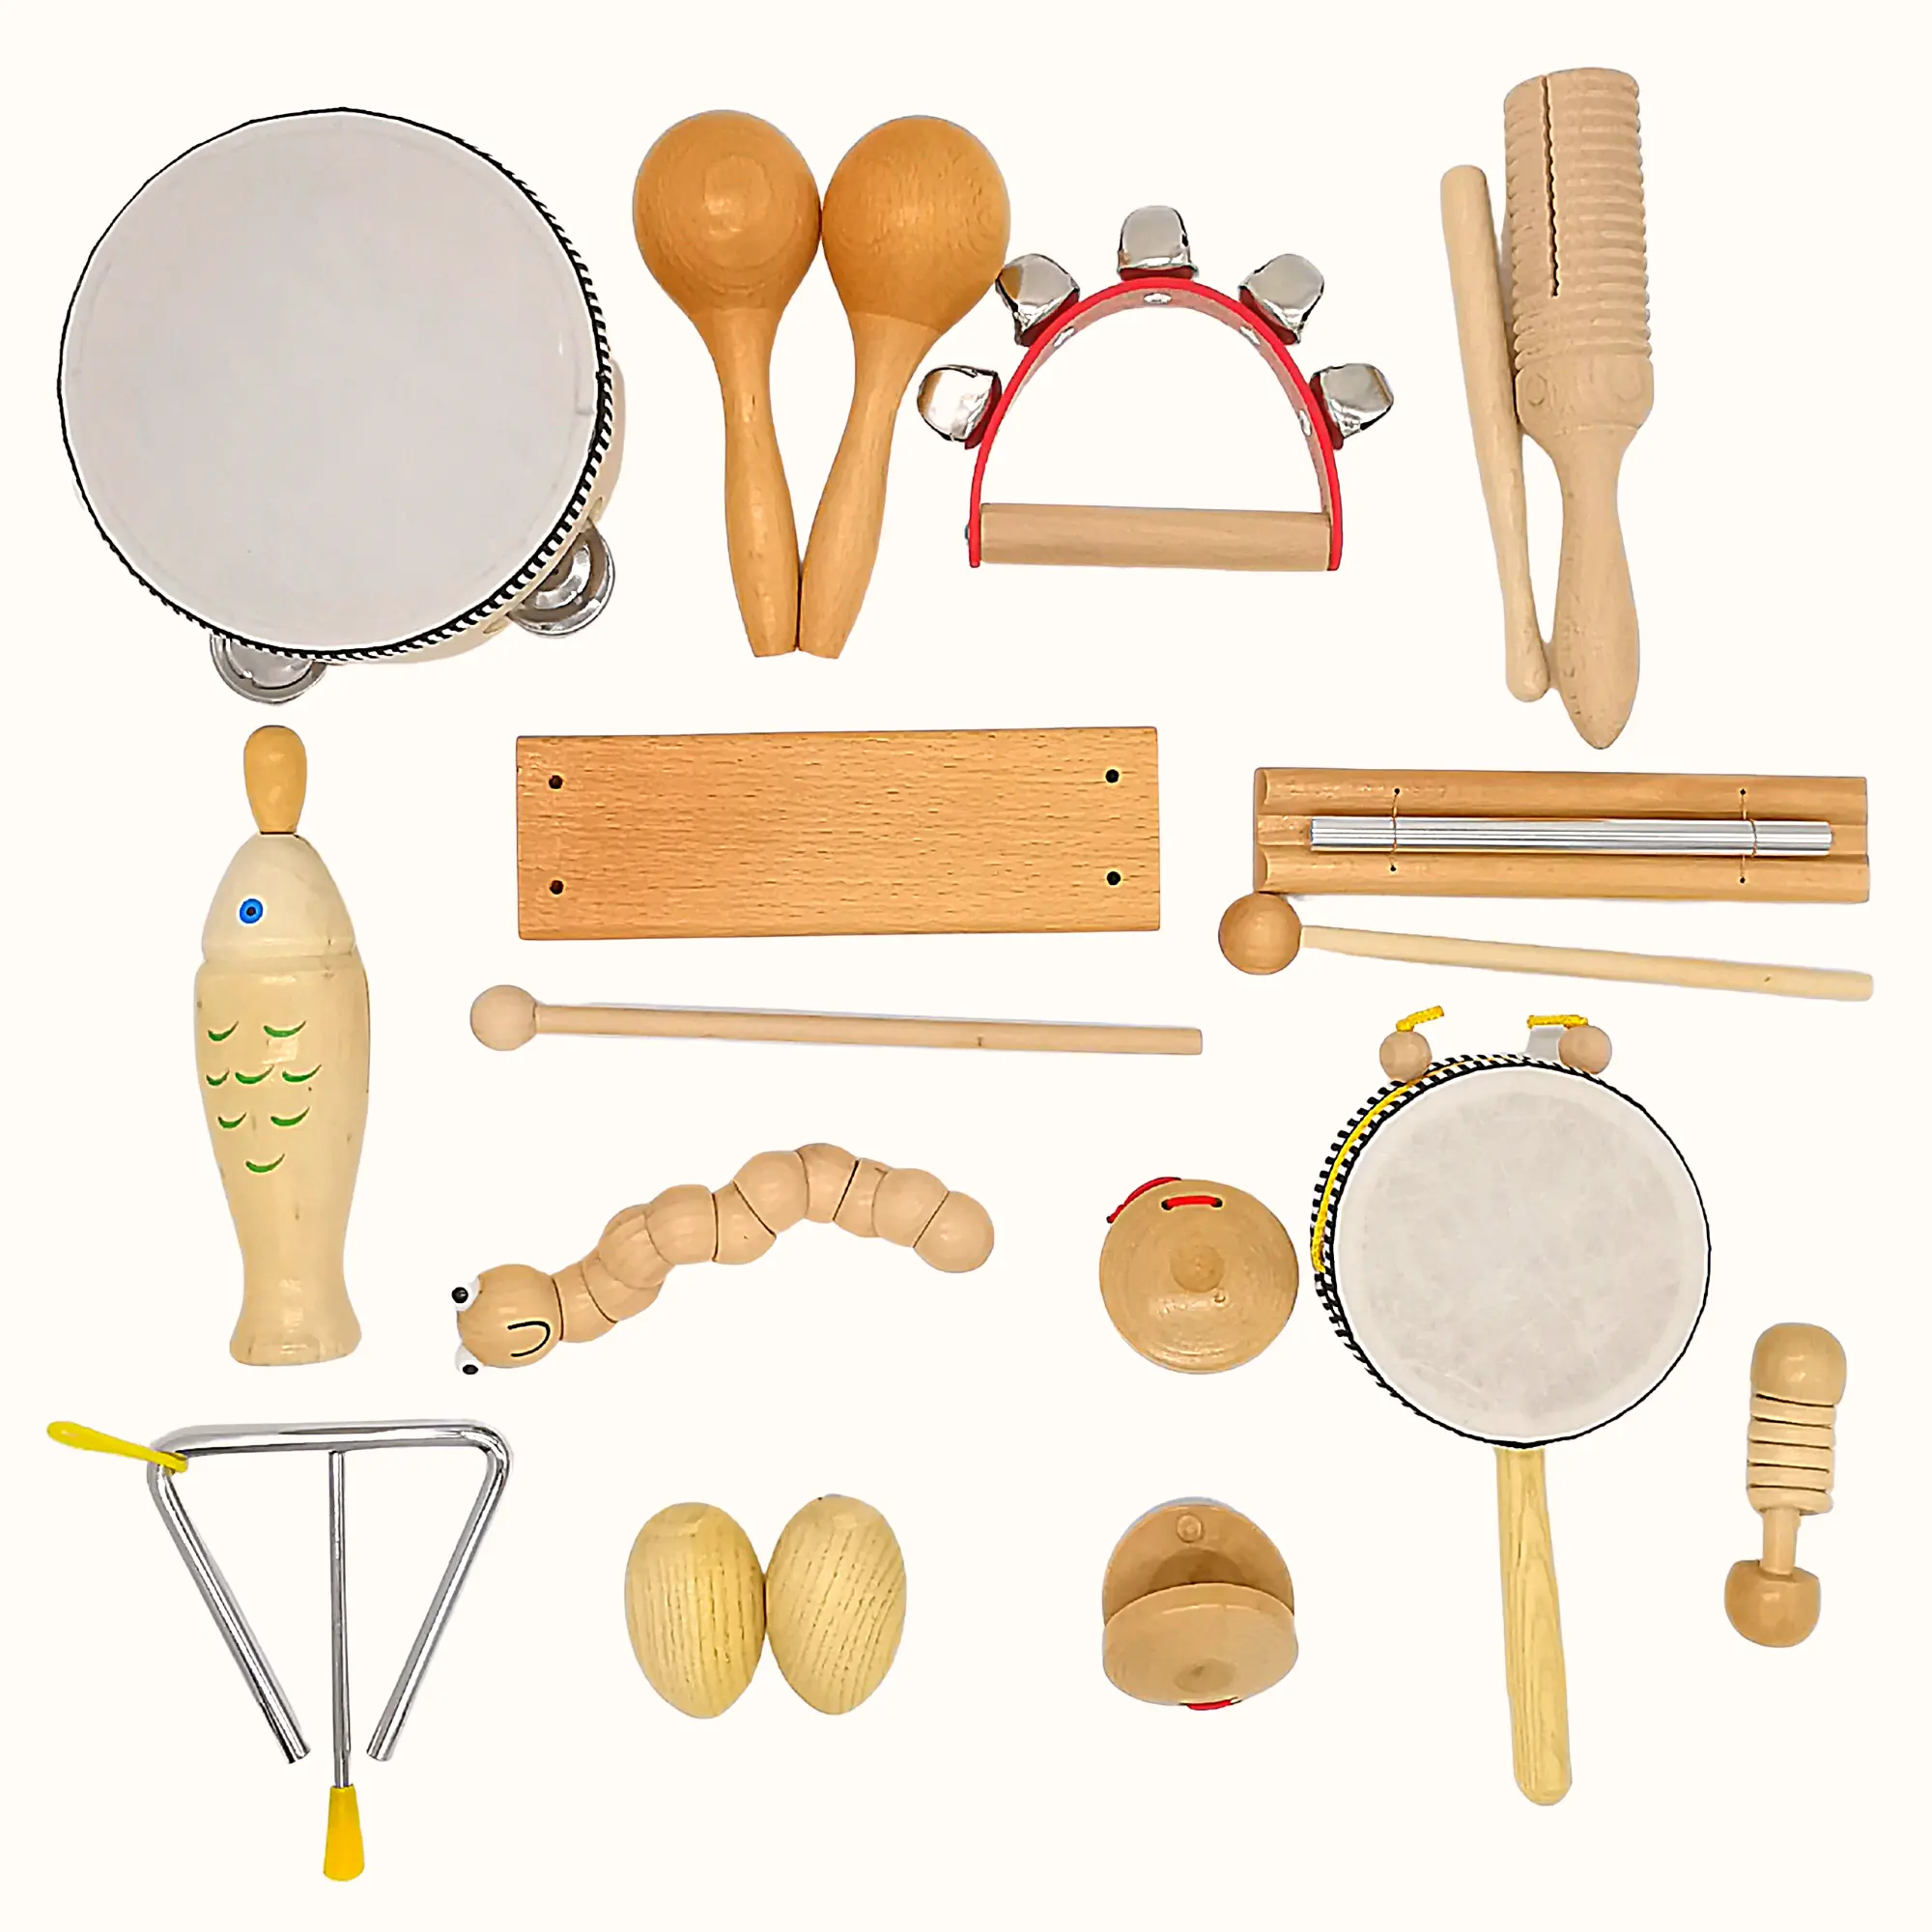 RTS JINGXUAN Natural Wooden Percussion Instruments Toy for Kids Preschool Educational Musical Toys Set for Boys and Girls